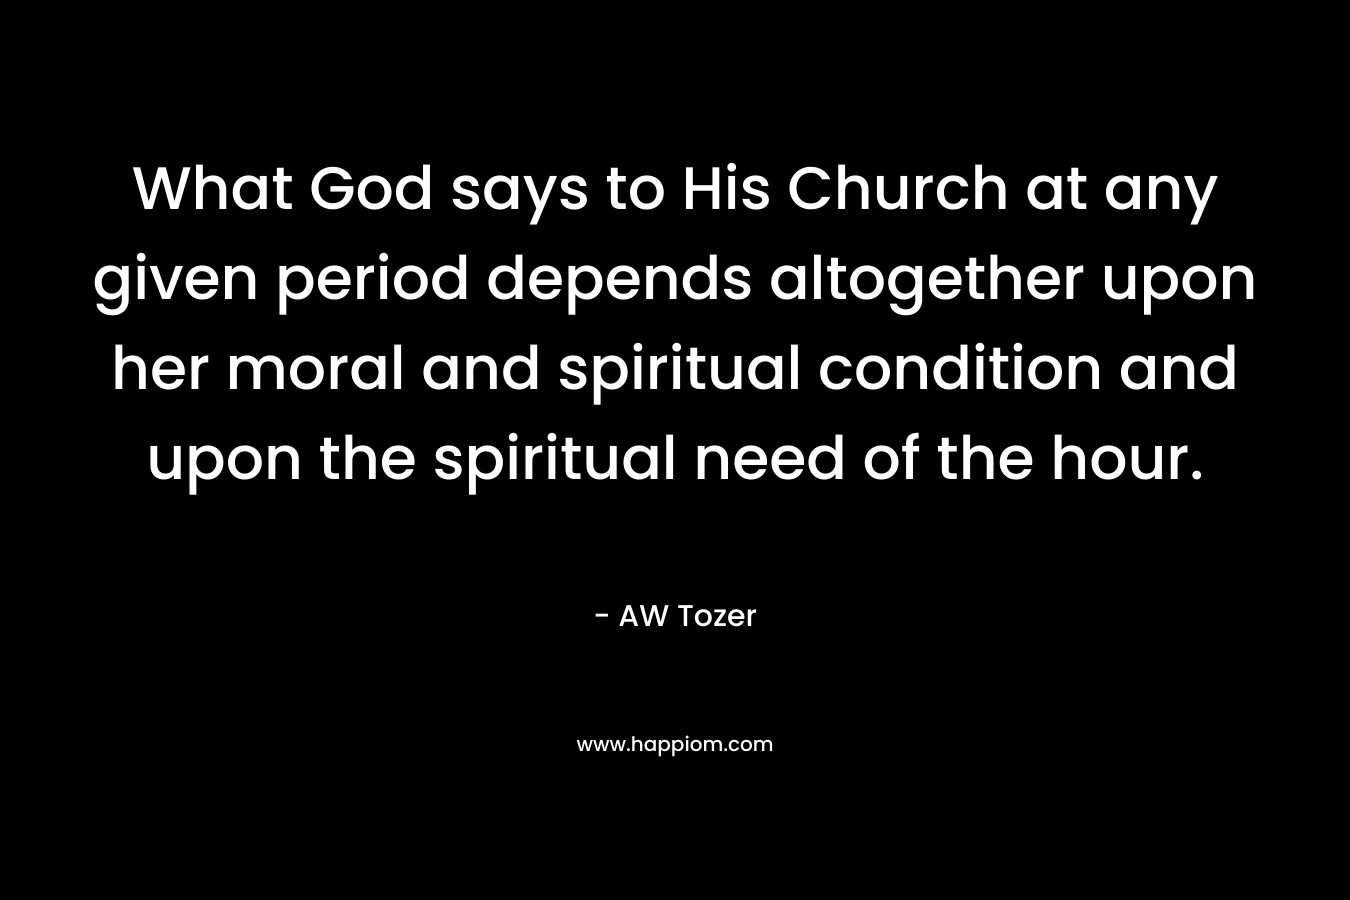 What God says to His Church at any given period depends altogether upon her moral and spiritual condition and upon the spiritual need of the hour.